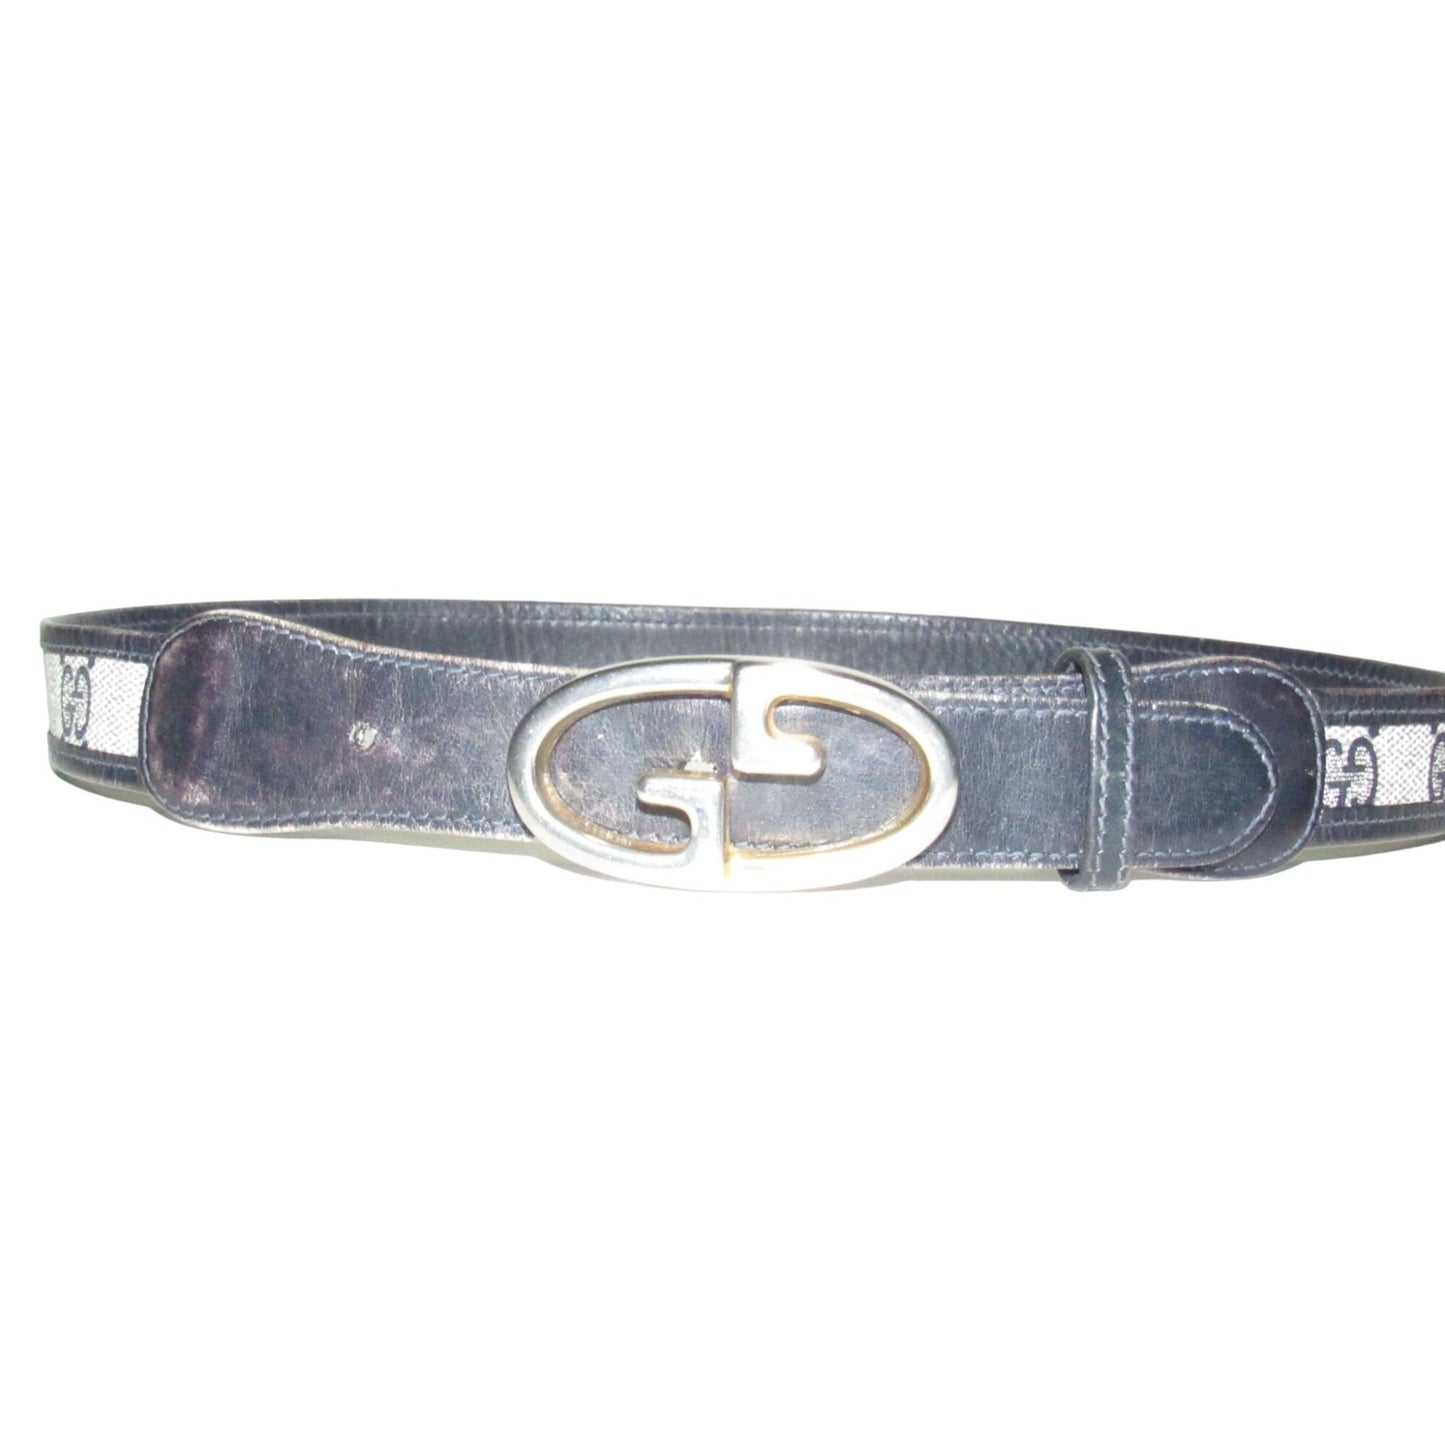 Gucci navy Guccissima leather belt w two- tone GG logo buckle